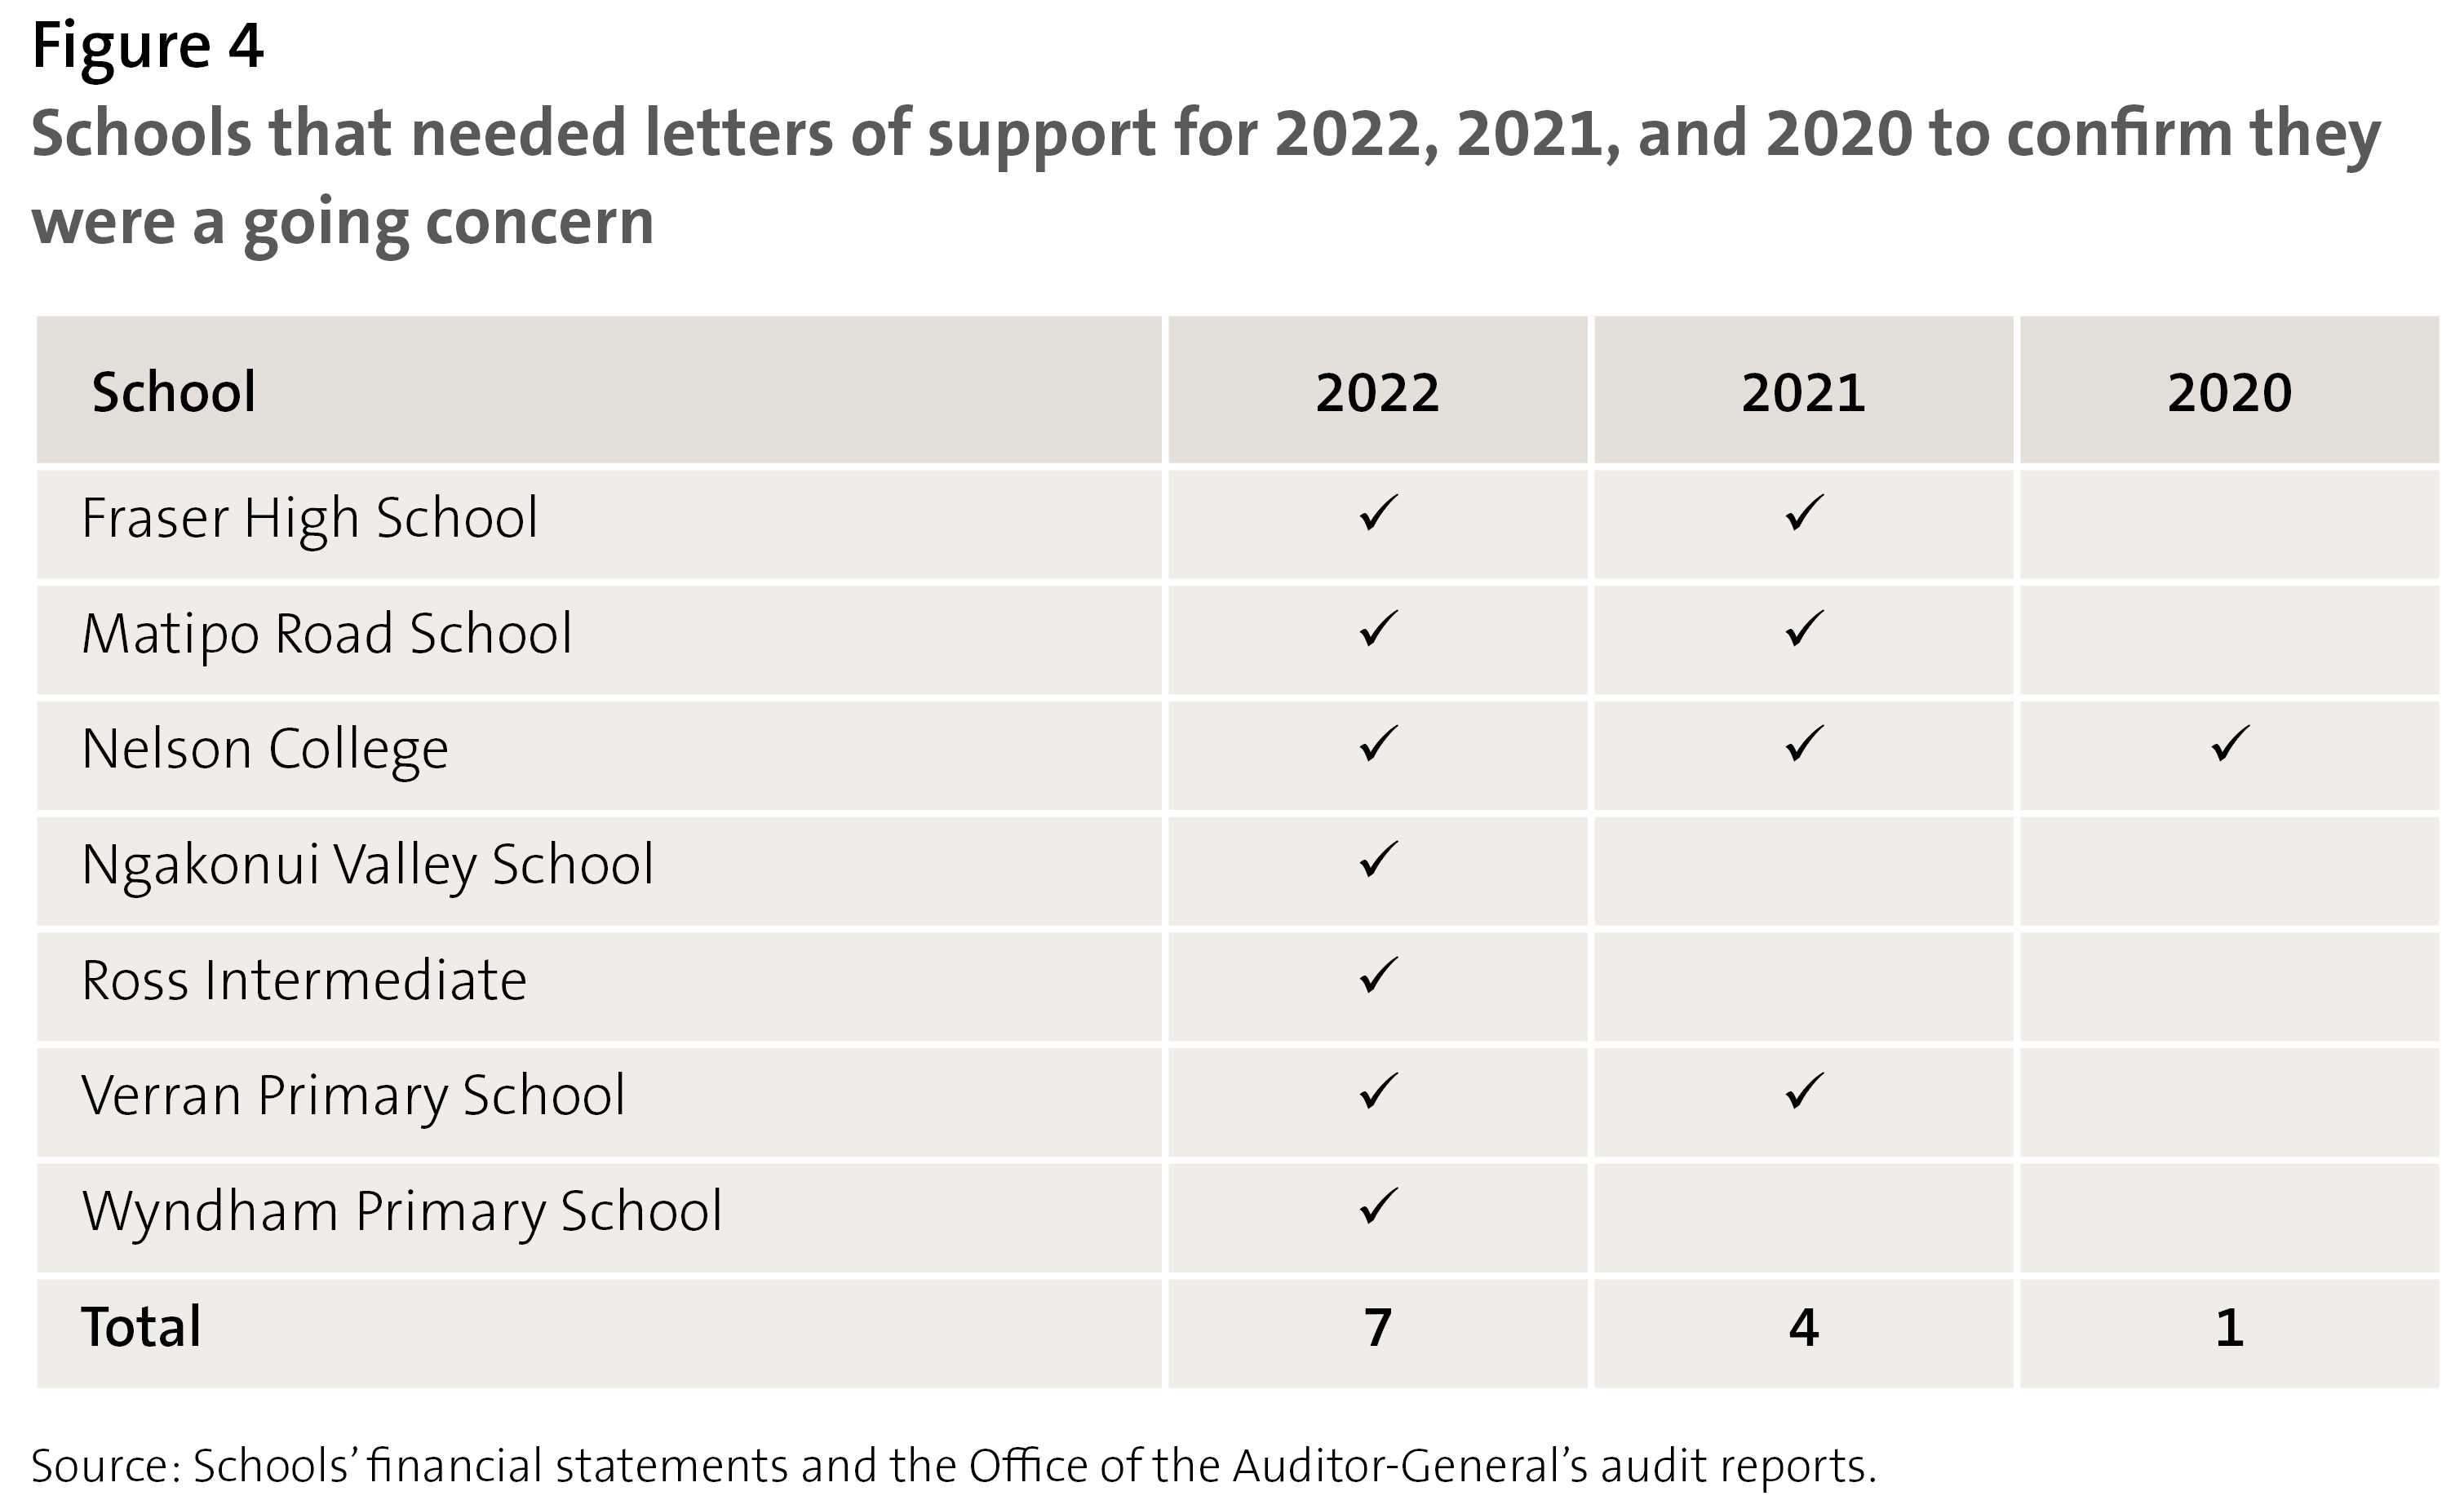 Figure 4 - Schools that needed letters of support for 2022, 2021, and 2020 to confirm they were a going concern